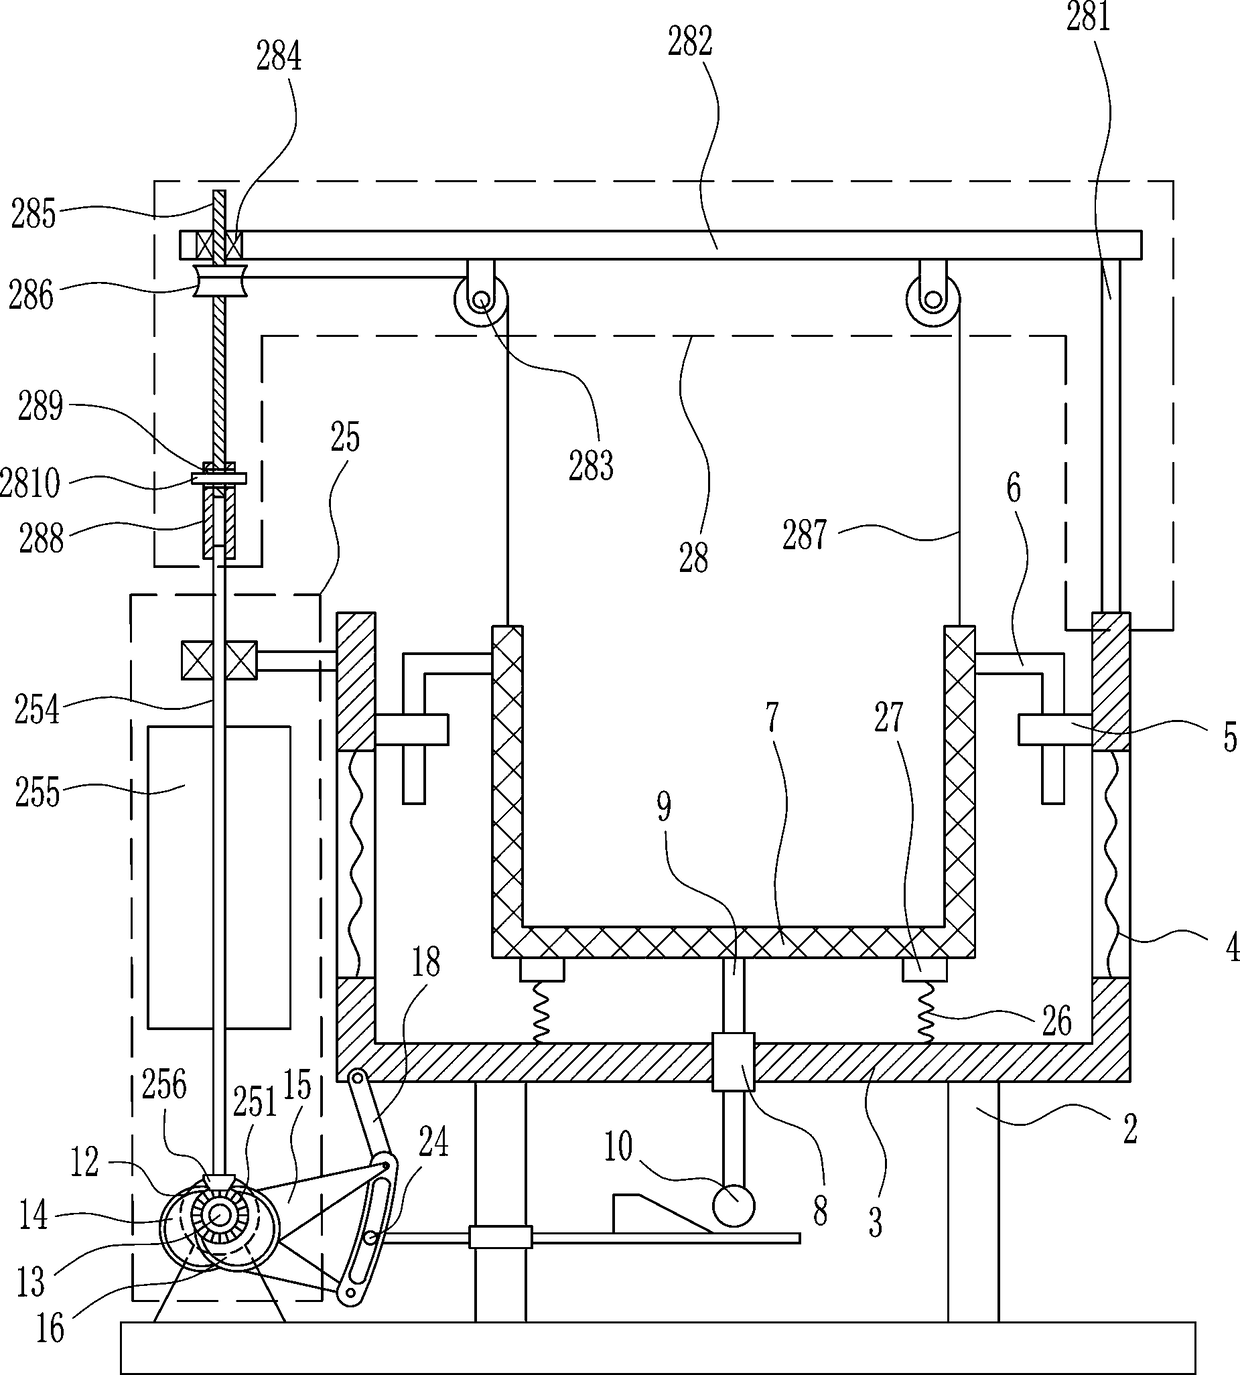 Medical apparatus and instrument drying equipment